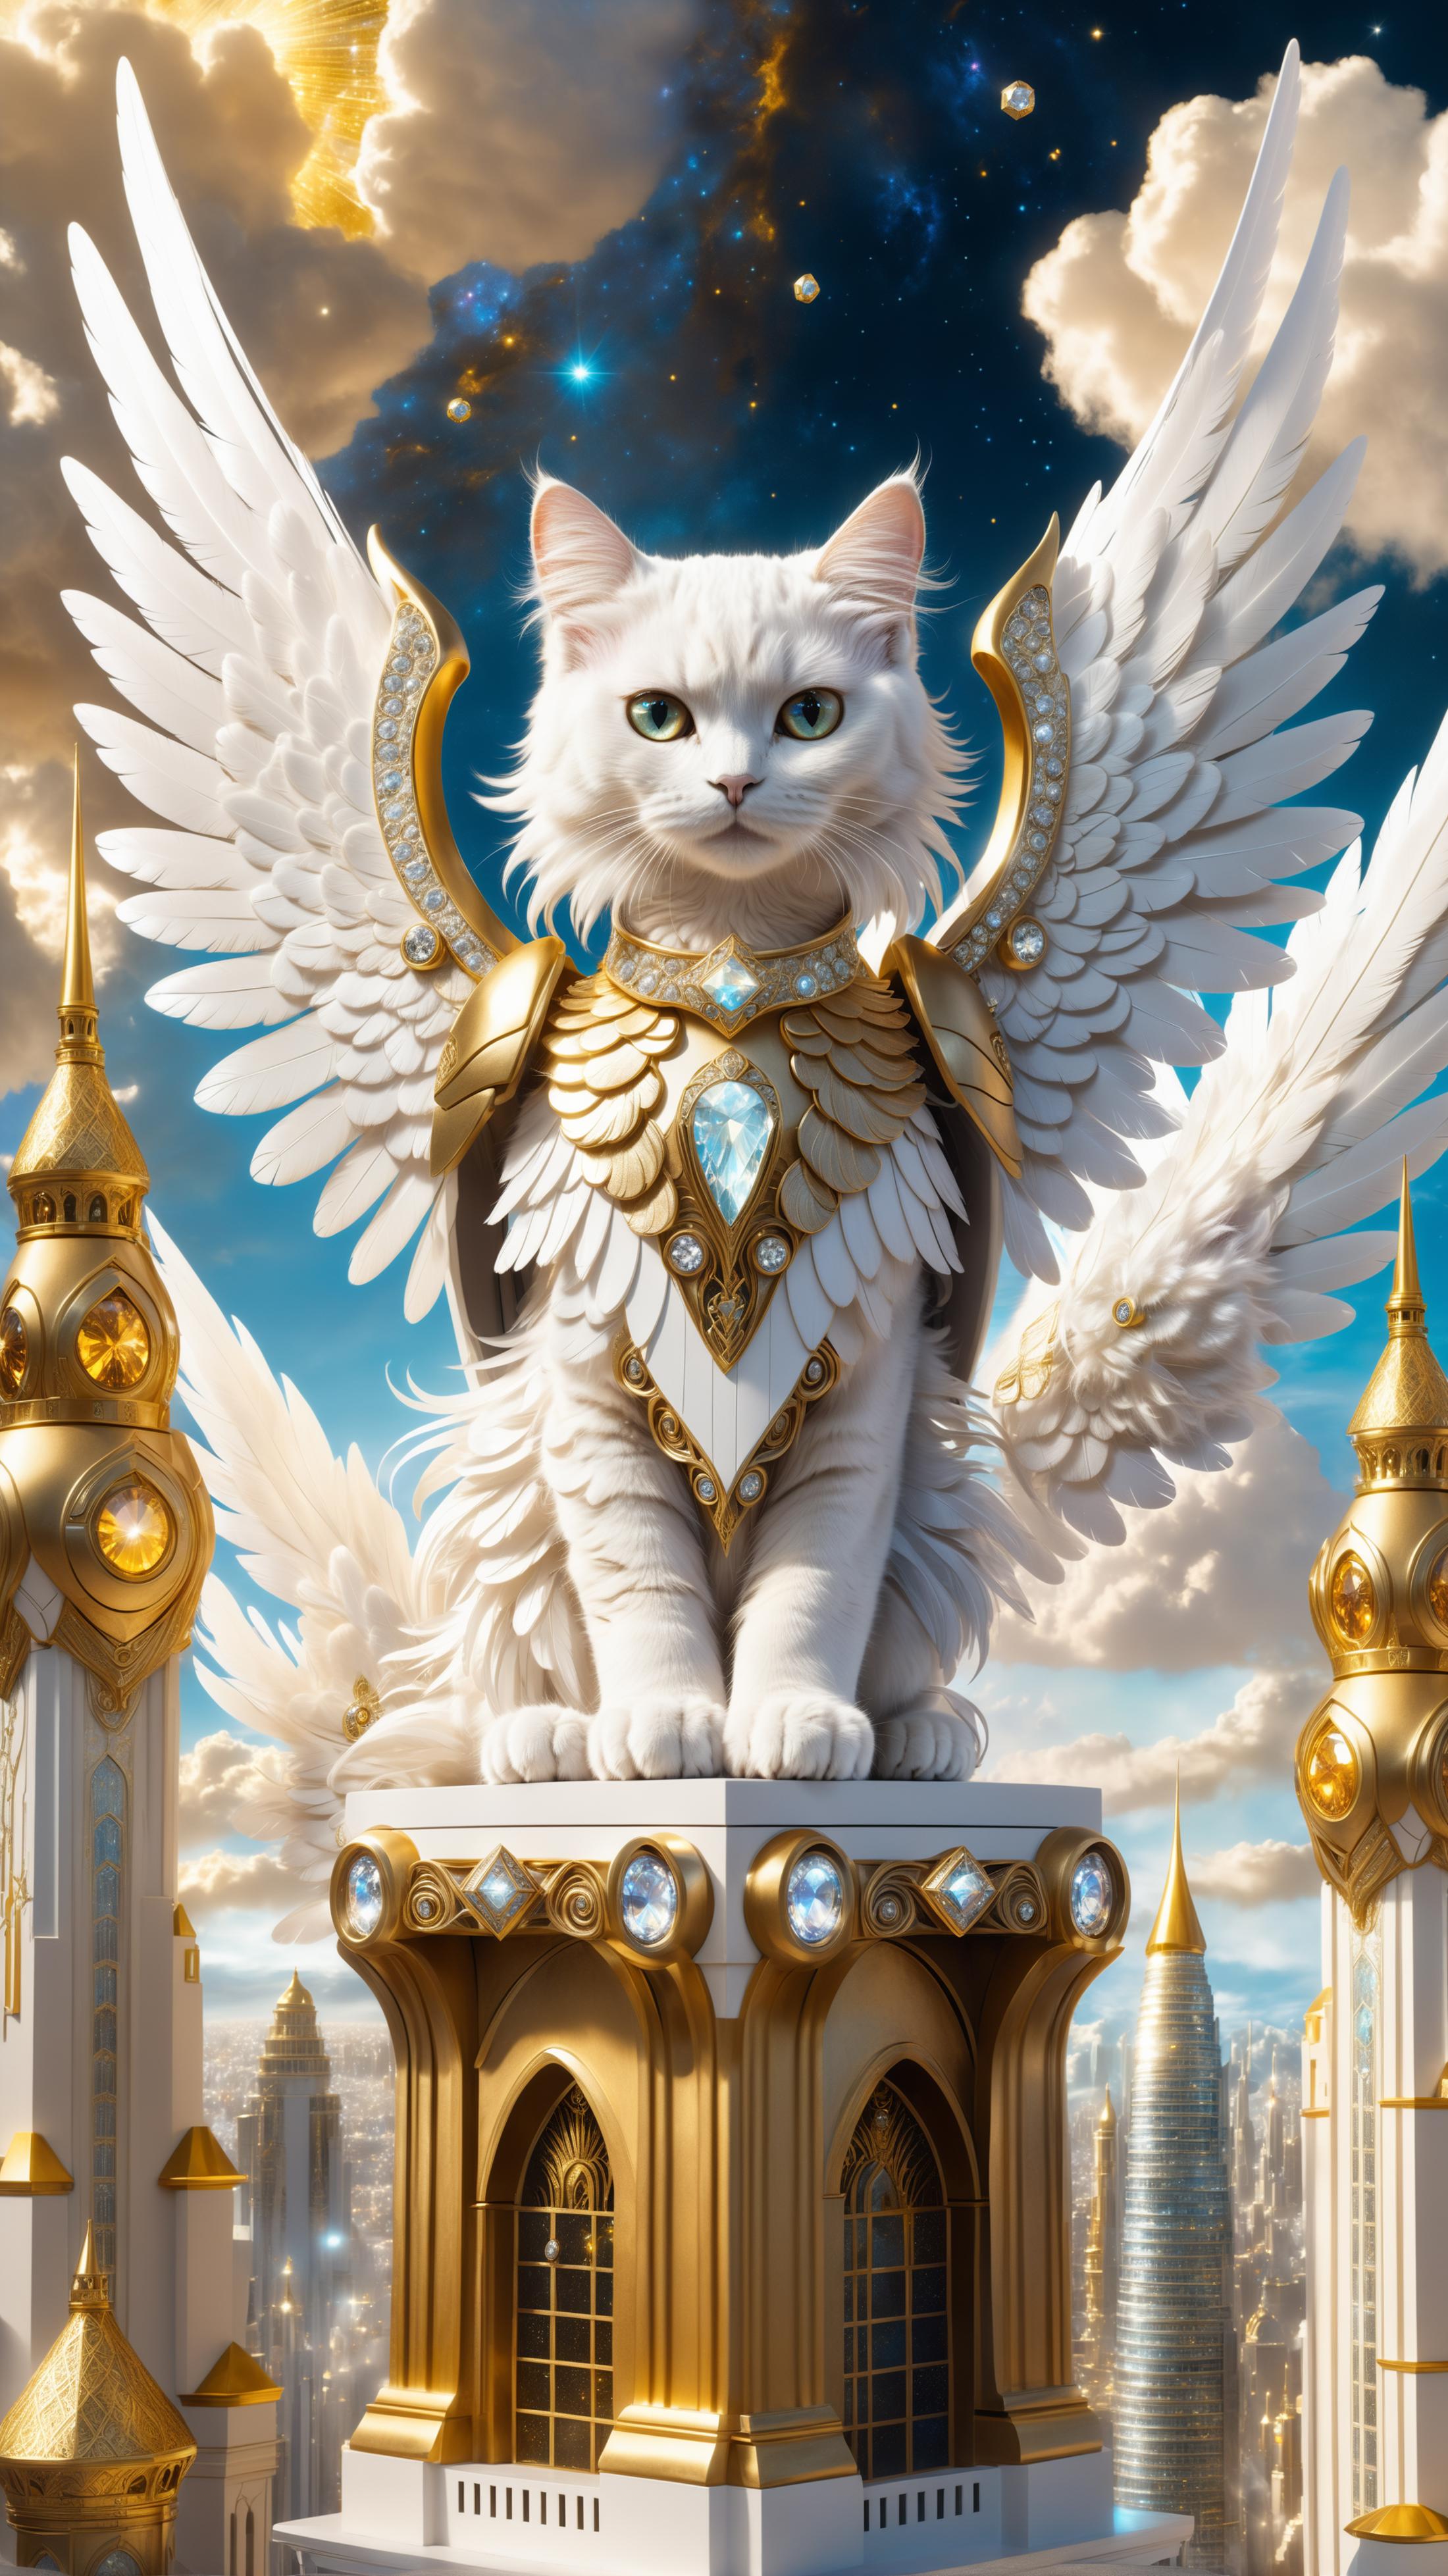 A white and gold cat with wings and a golden crown is sitting on a pedestal.